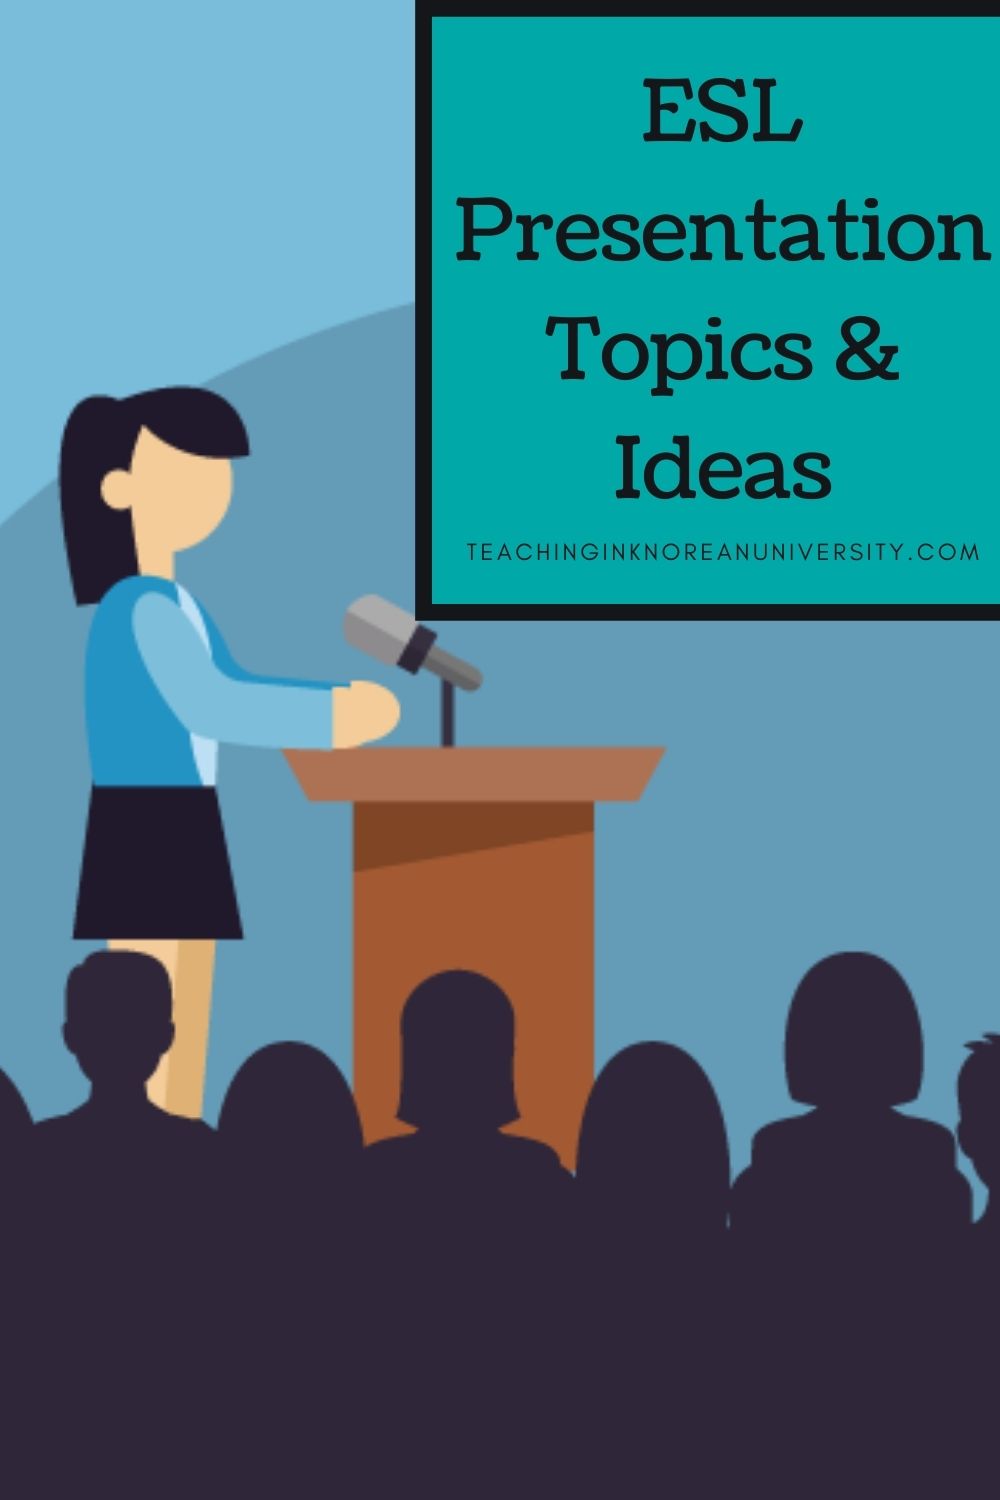 oral presentation topics for high school students